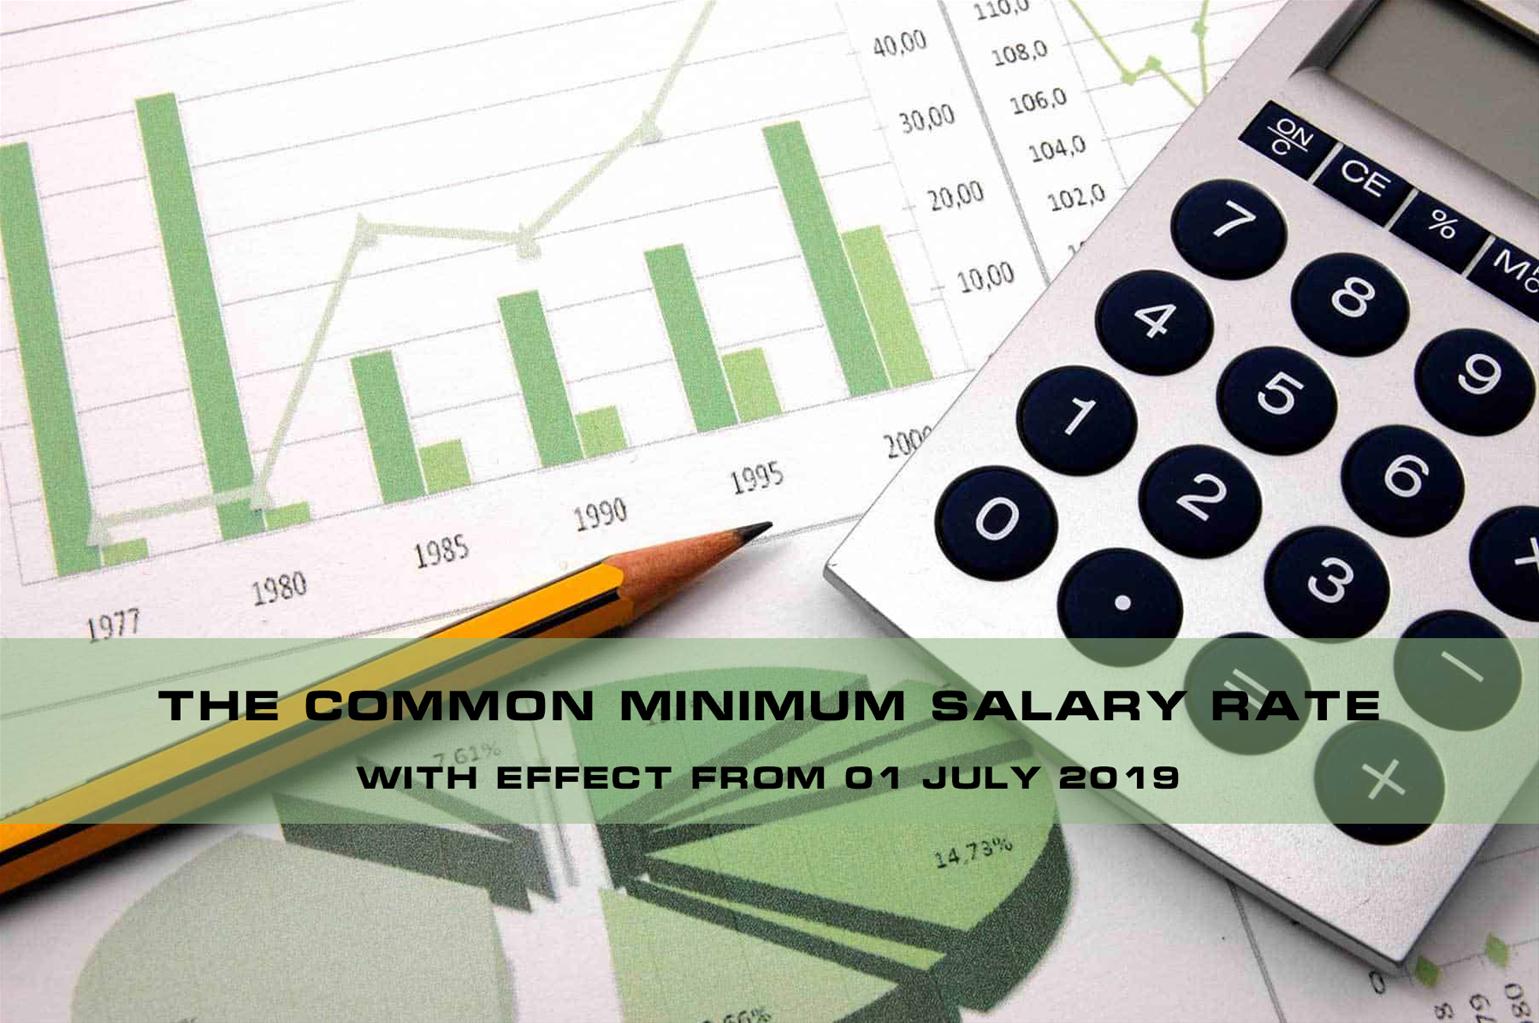 The common minimum salary rate with effect from 01 July 2019